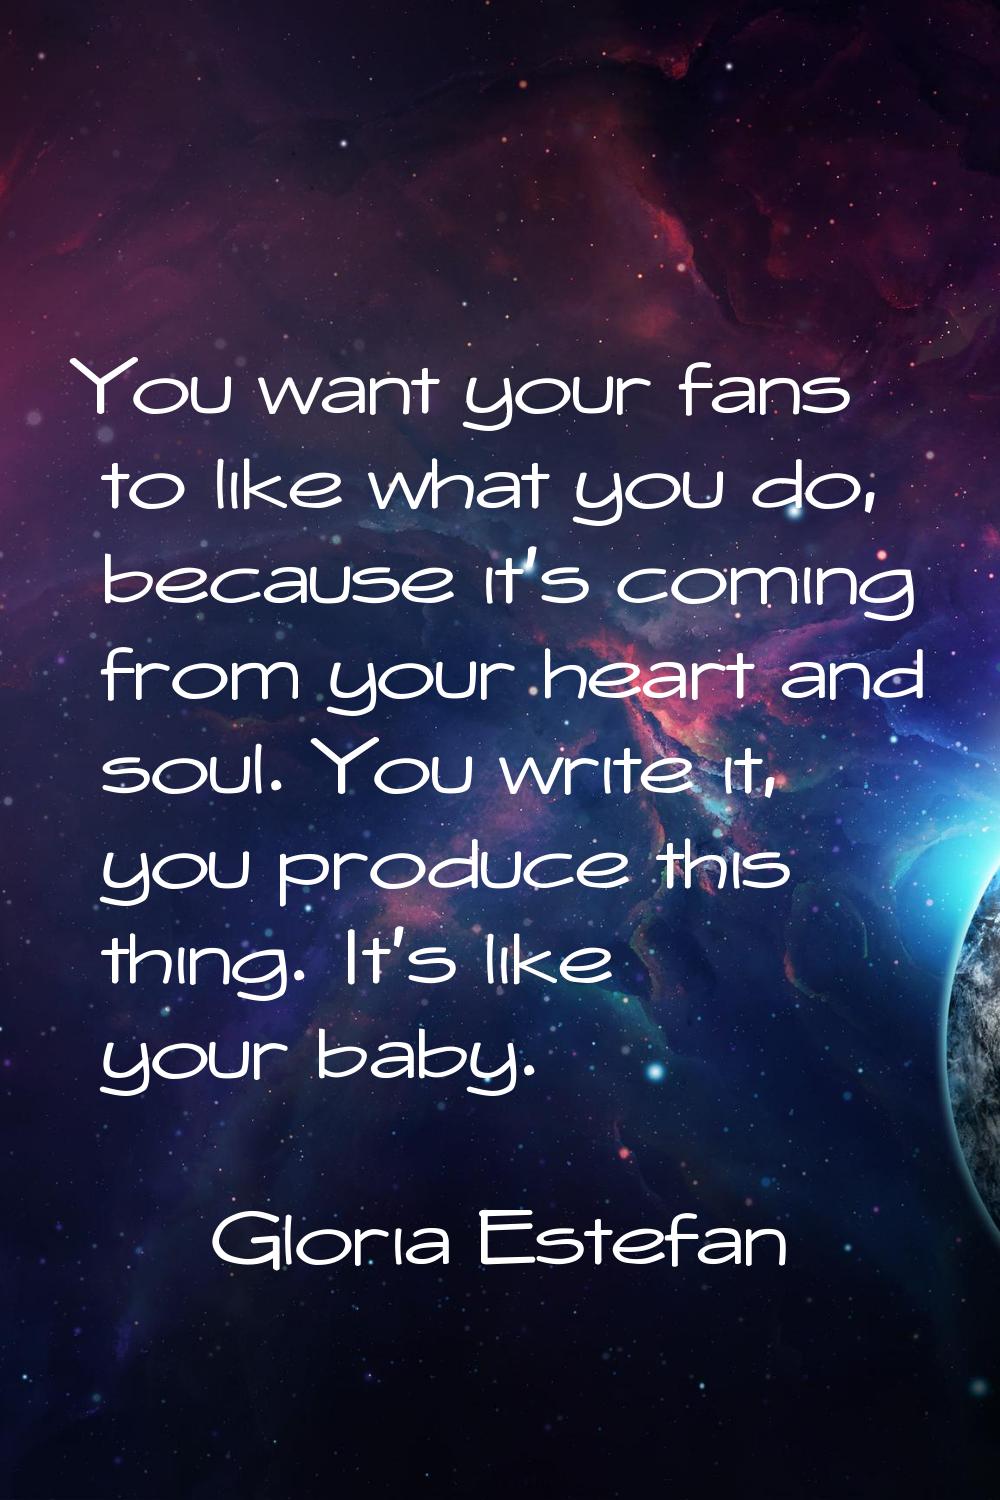 You want your fans to like what you do, because it's coming from your heart and soul. You write it,